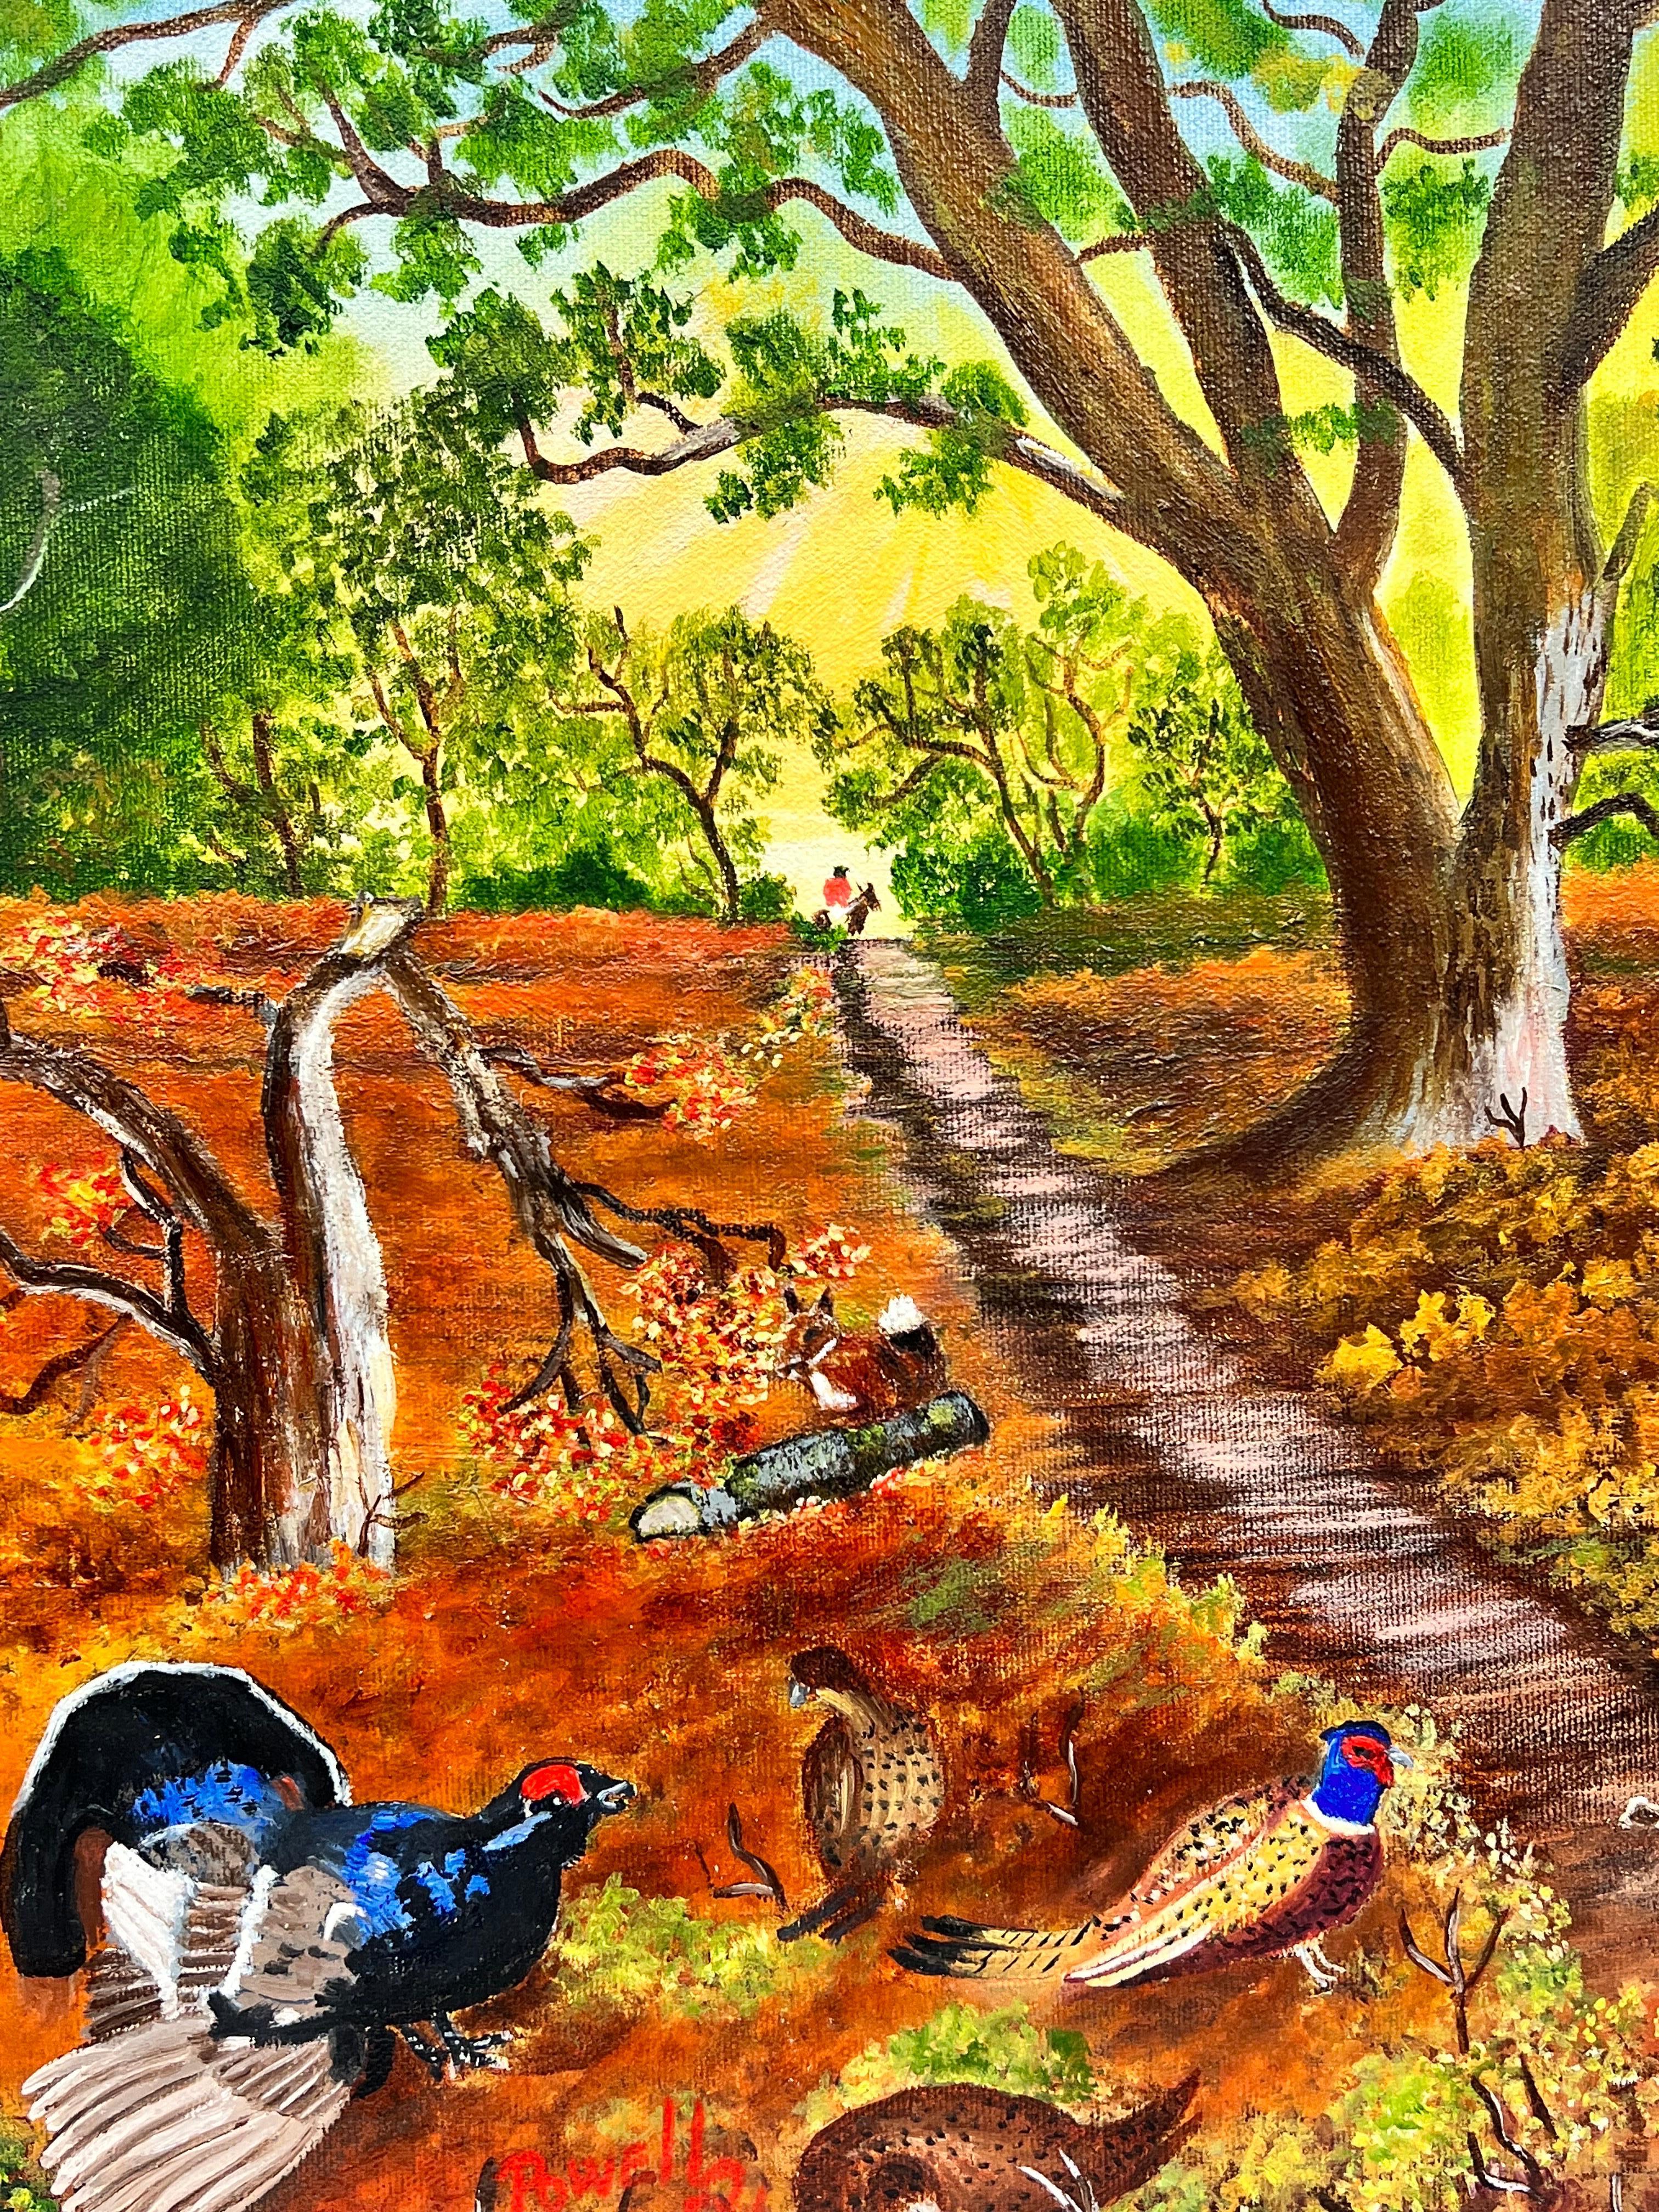 Pheasants in Golden Autumn Leaves Woodland Pathway Contemporary British painting - Painting by Ben Powell